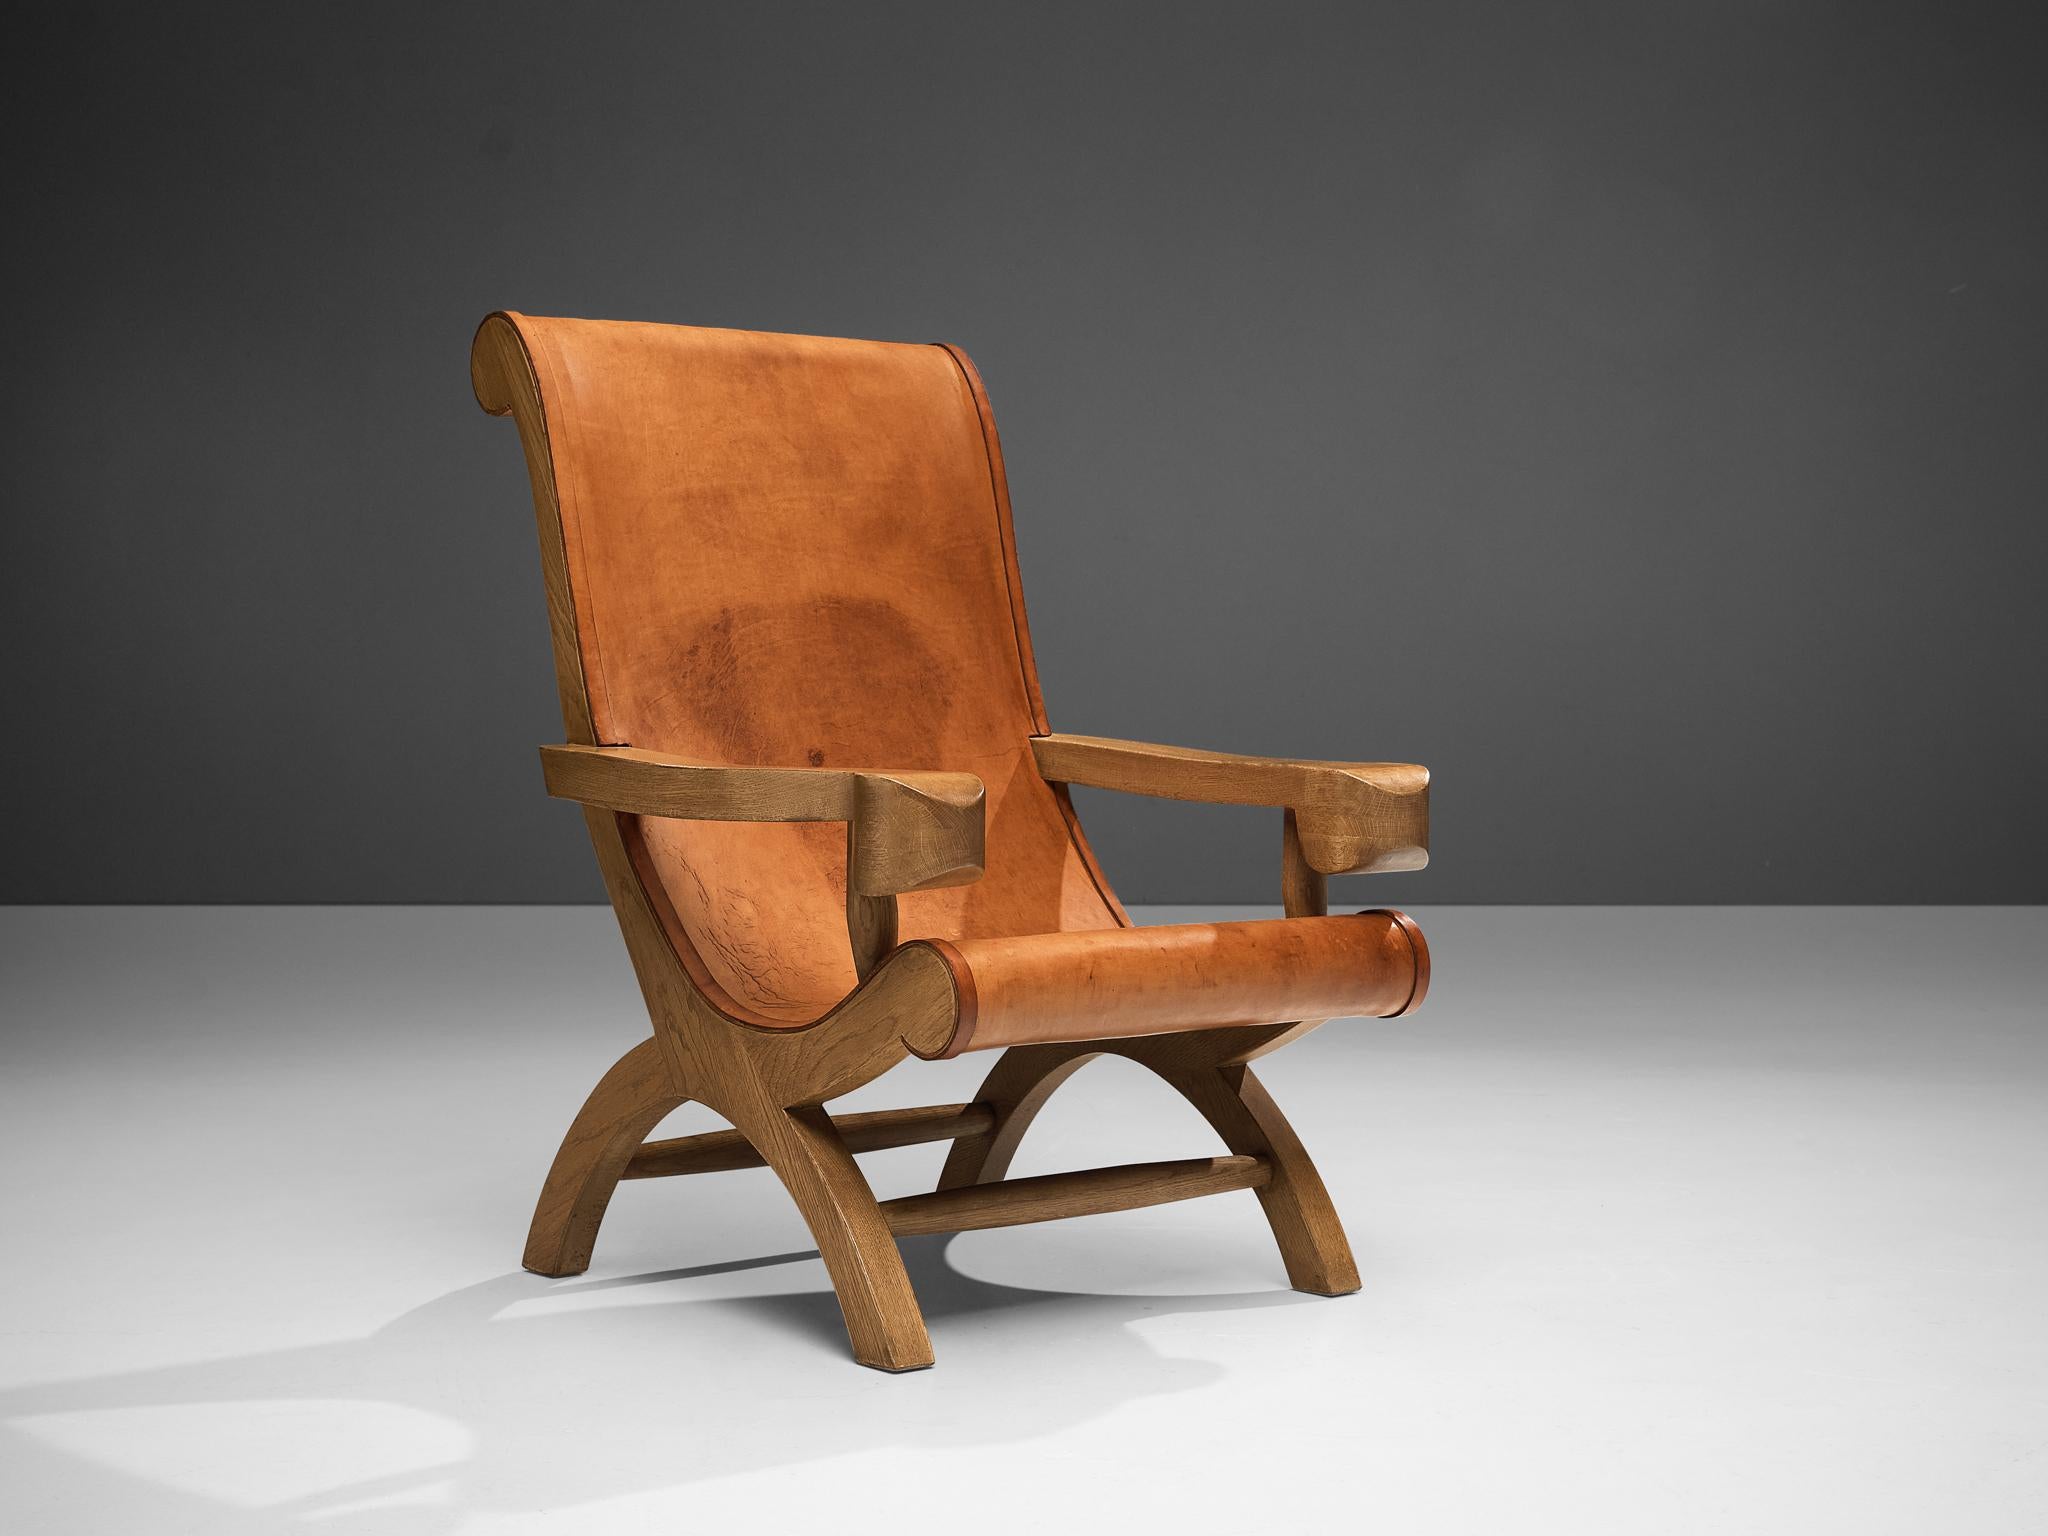 Clara Porset Lounge Chairs 'Butaque' in Original Patinated Leather For Sale 6